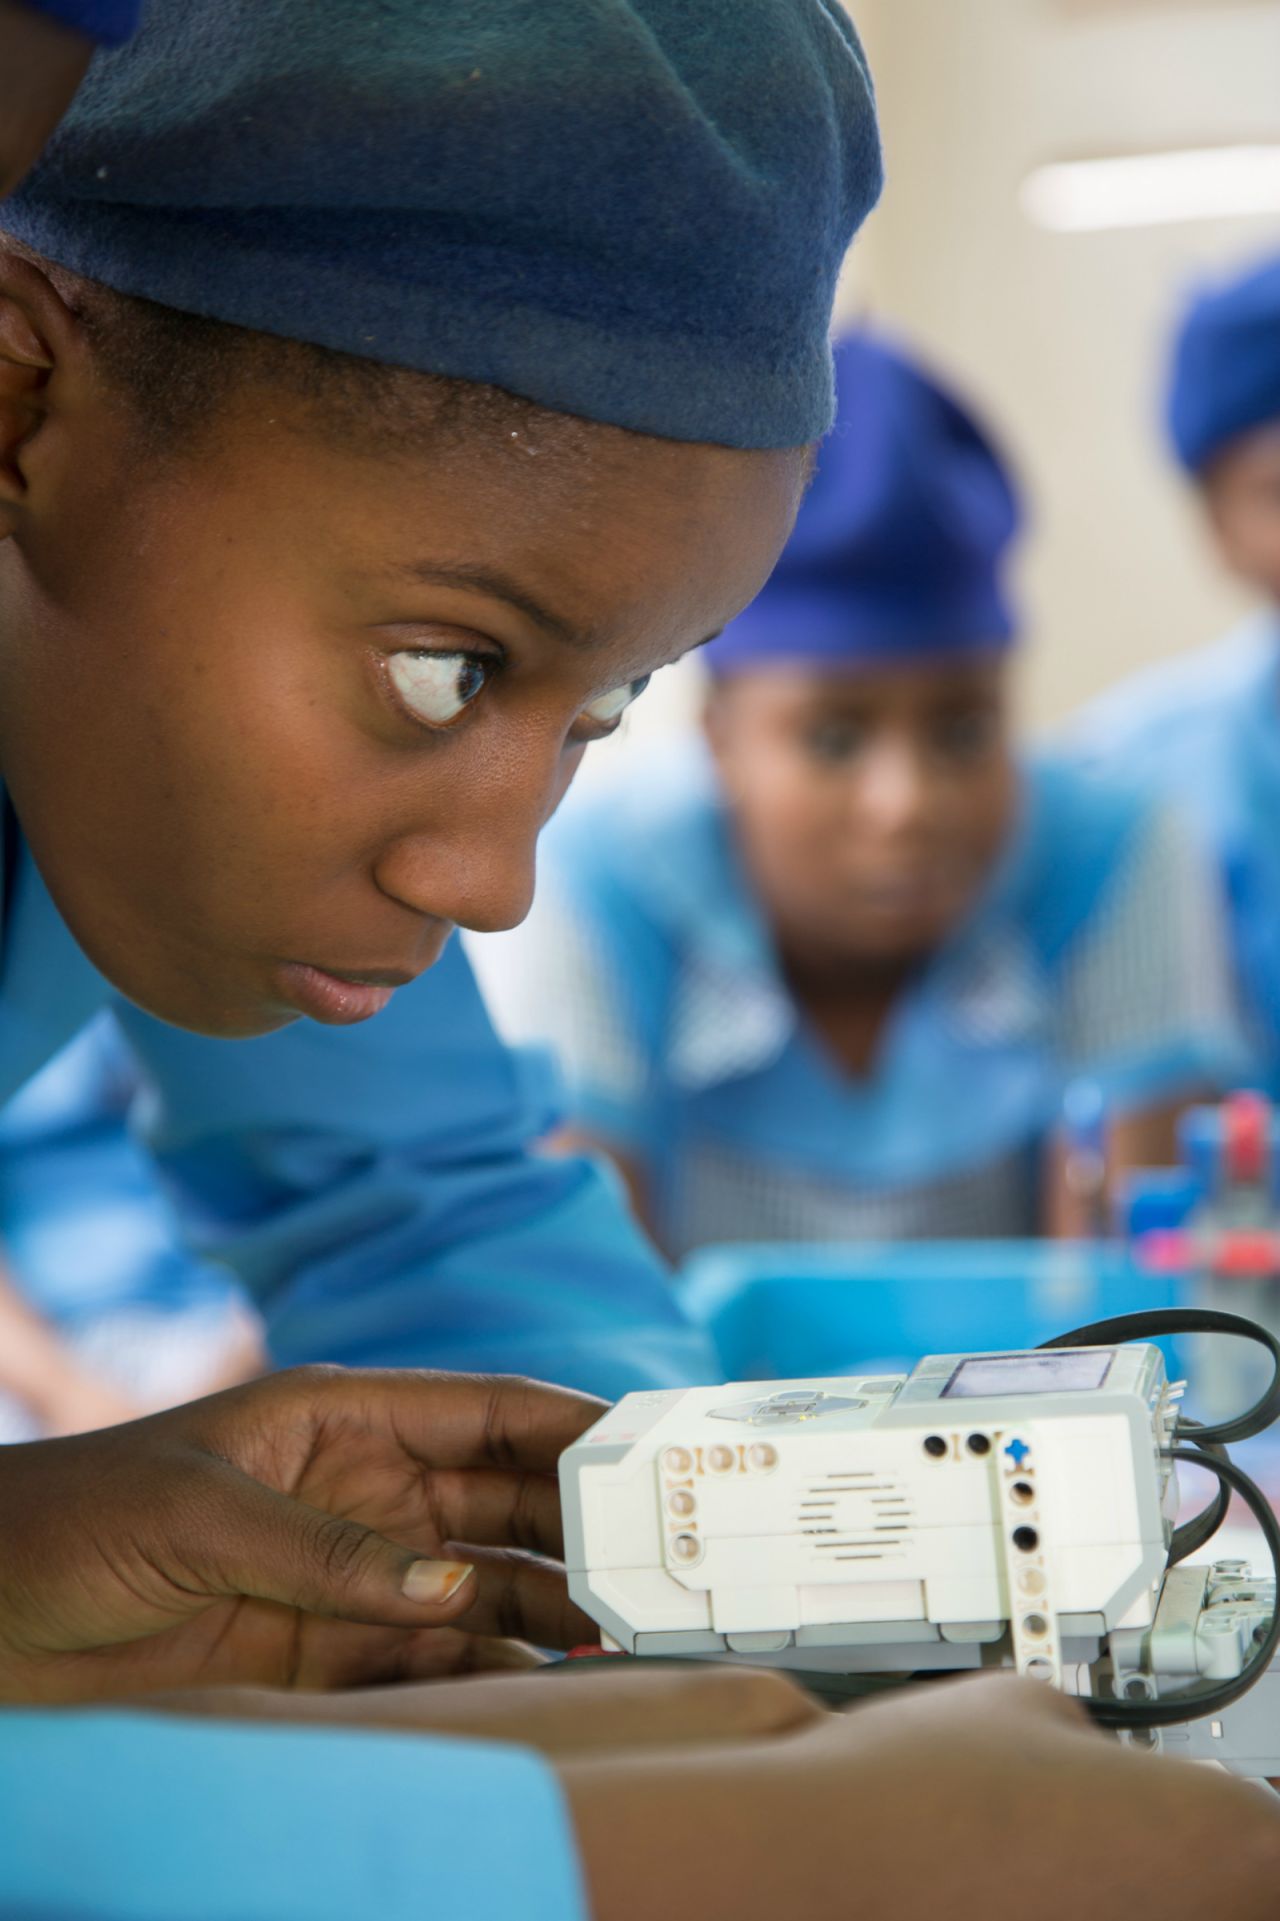 "State schools in Nigeria are often understaffed and they are not able to pay for the kits to learn robotics", Uzochukwu says. Therefore Odyssey Foundation provides the robotics kits for free. It aims to teach kids to write apps, repair laptops, desktop computers and mobiles. "So when the children finish school they will not be roaming on the streets," says Uzochukwu, "because this is what happens to these kids once they finish school they end up on the streets". 